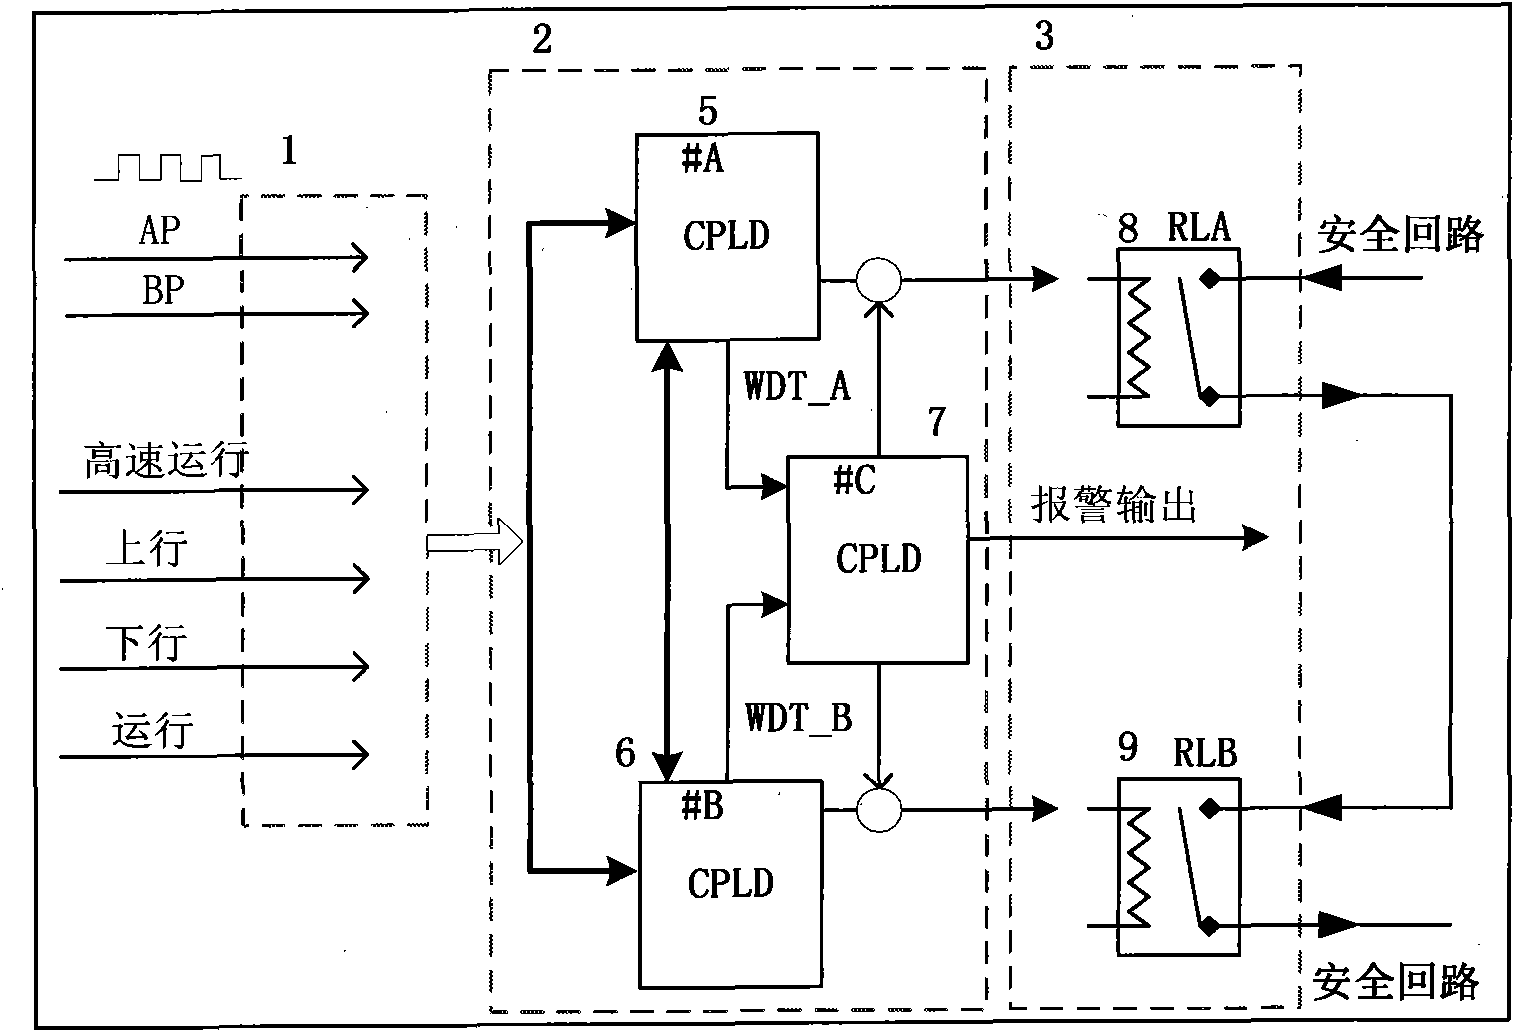 Reverse, over-speed and stall protection safety circuit of escalator and moving walkway